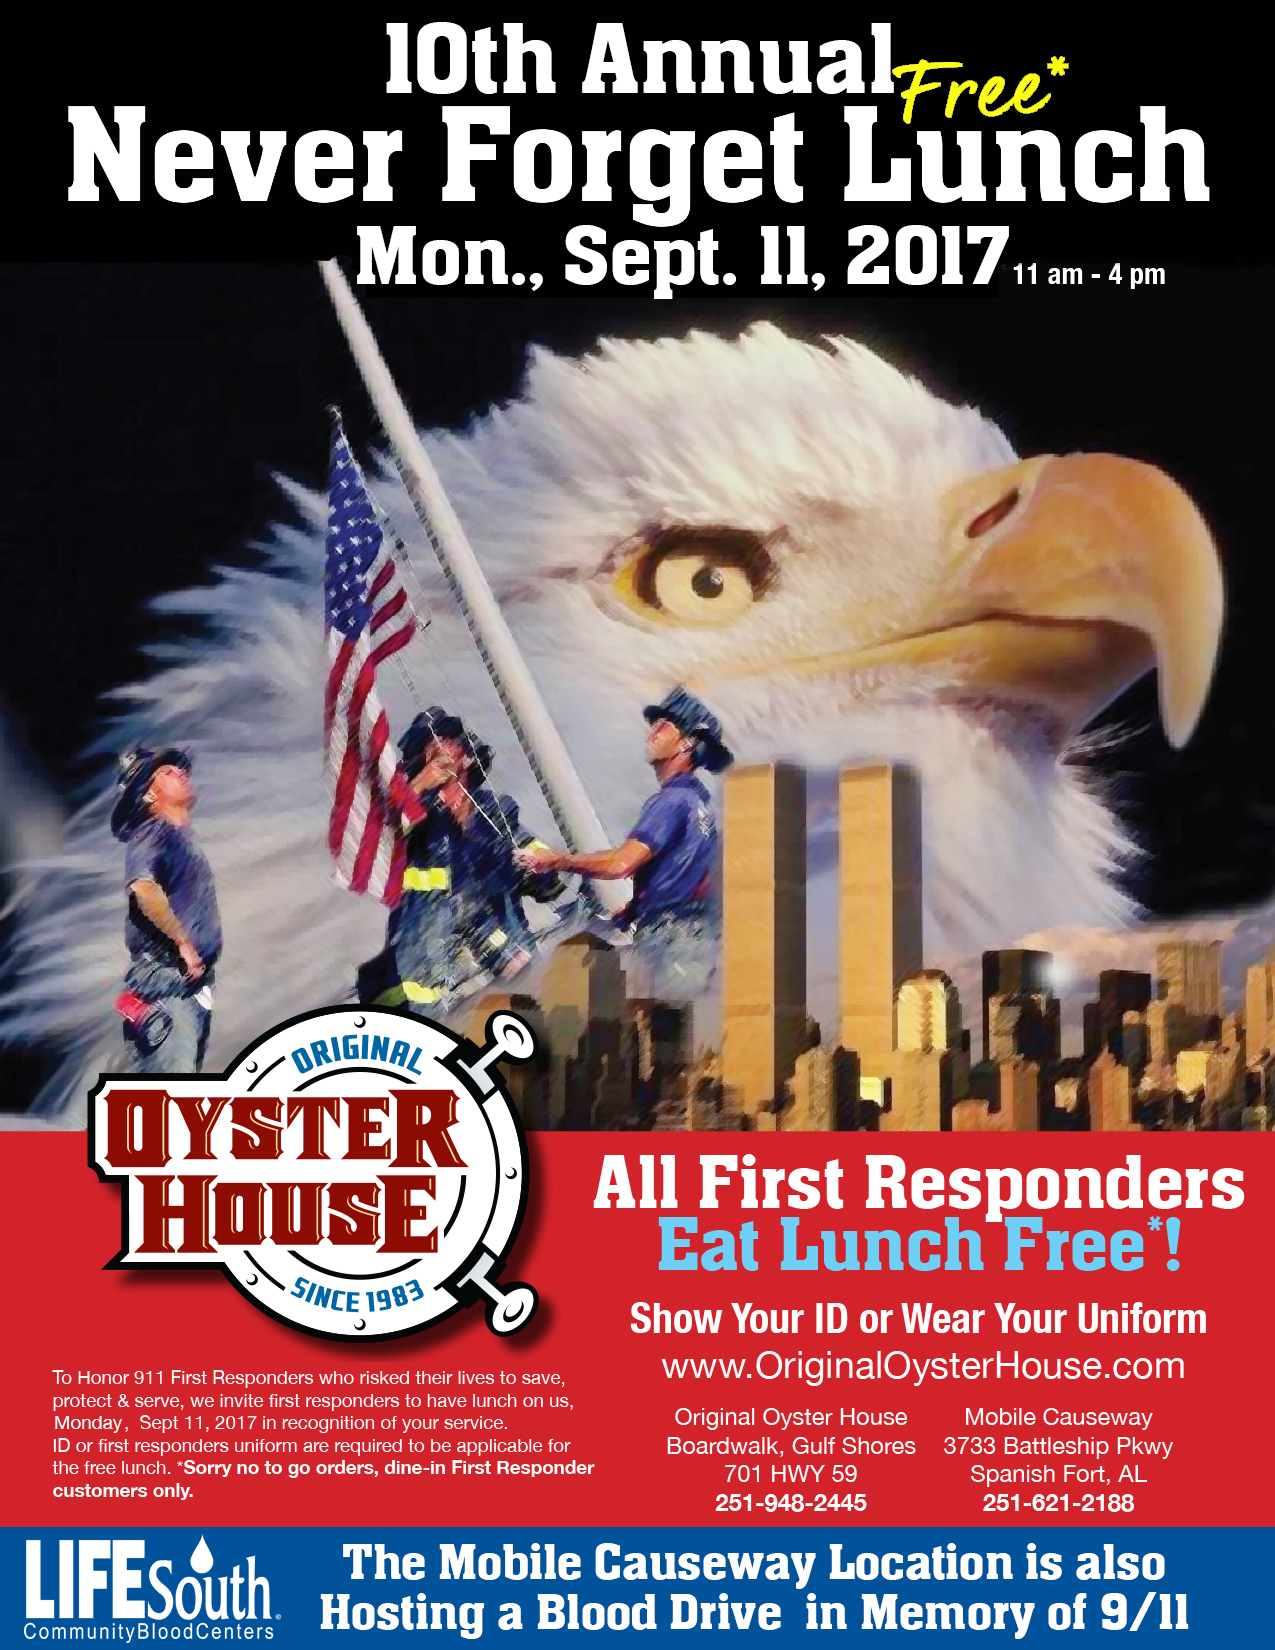 Never Forget Lunch Monday, Sept. 11th